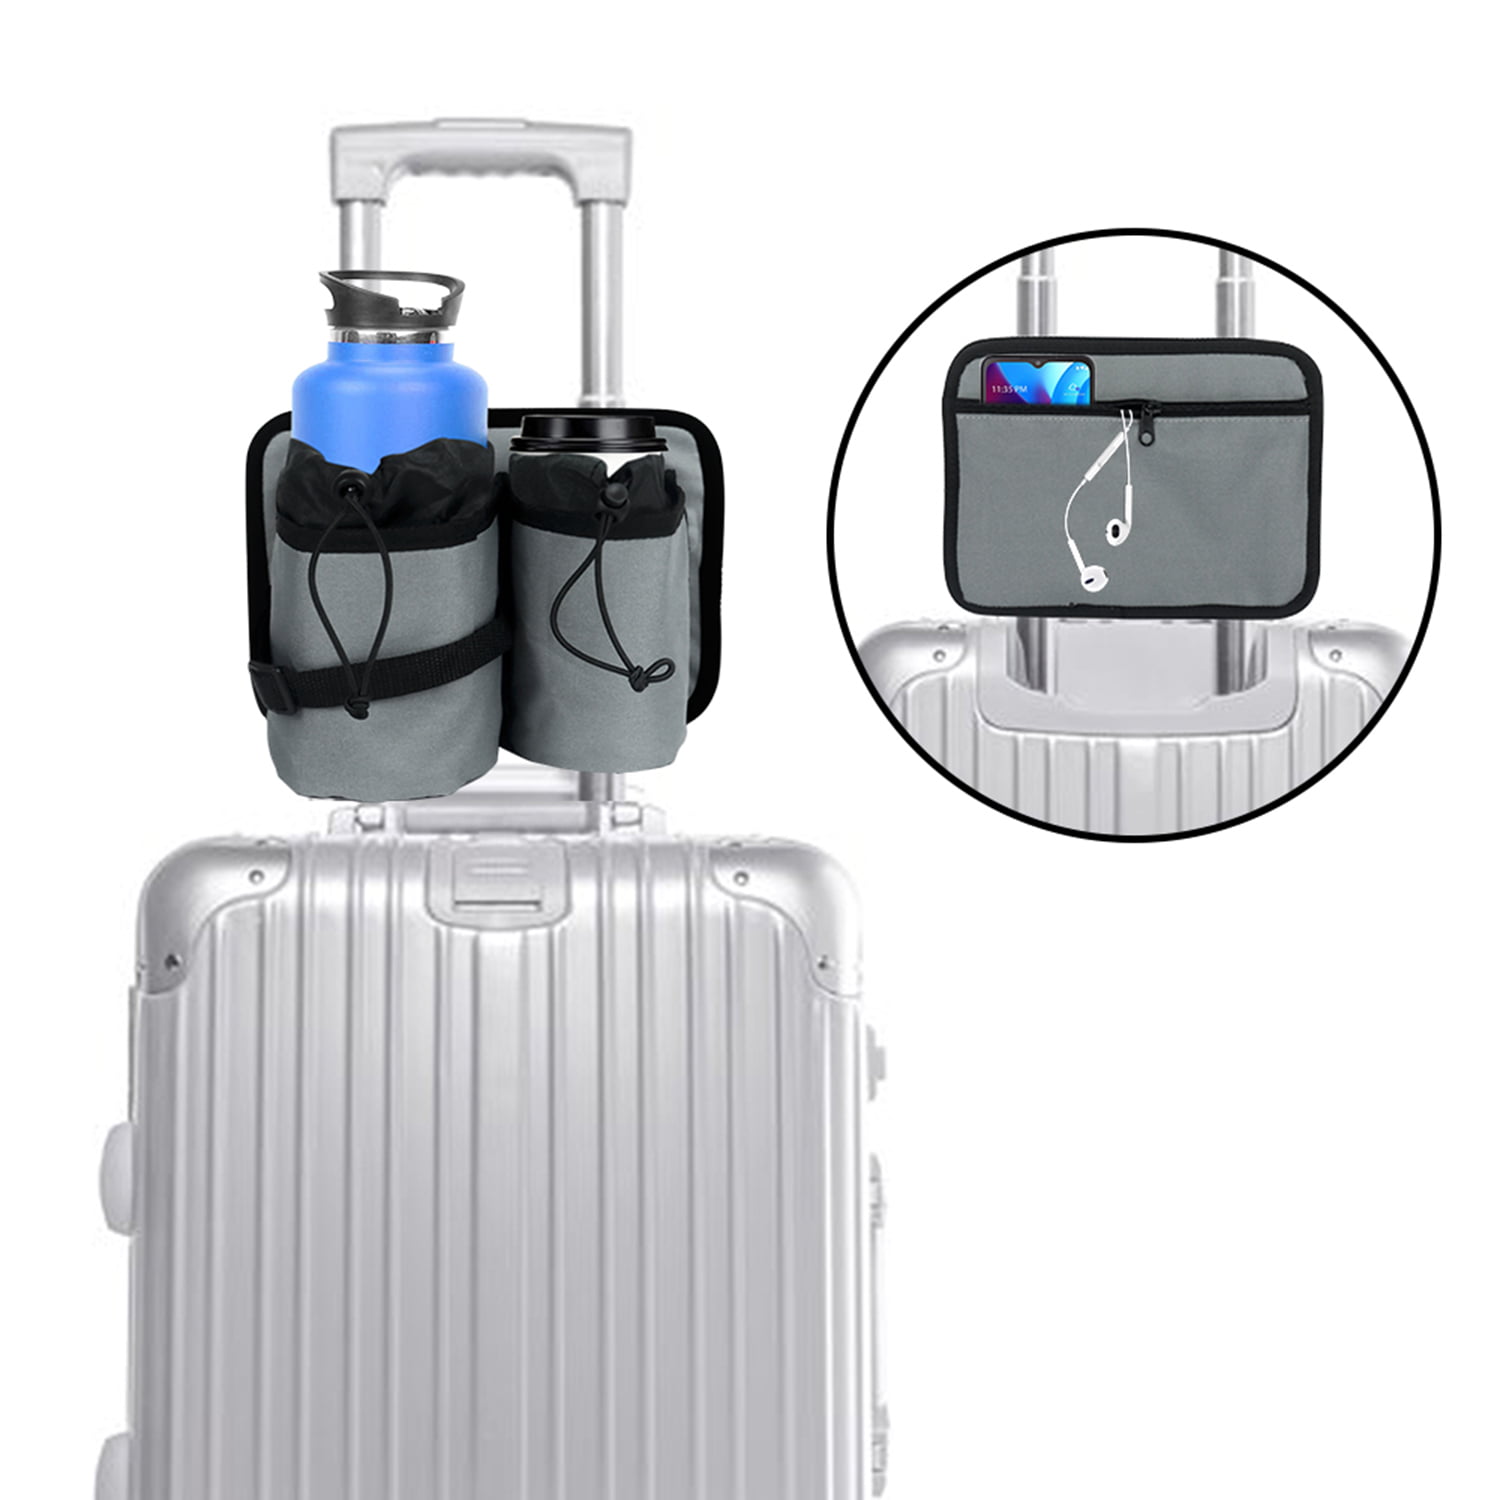  Travel Luggage Cup Holder, Vethers Drink Carrier, Luggage Cup  Holder Attachment, Free Hand Suitcase Drink Carrier for Drinks Beverages,  Coffee, Bottles, Snacks (Black) : Home & Kitchen